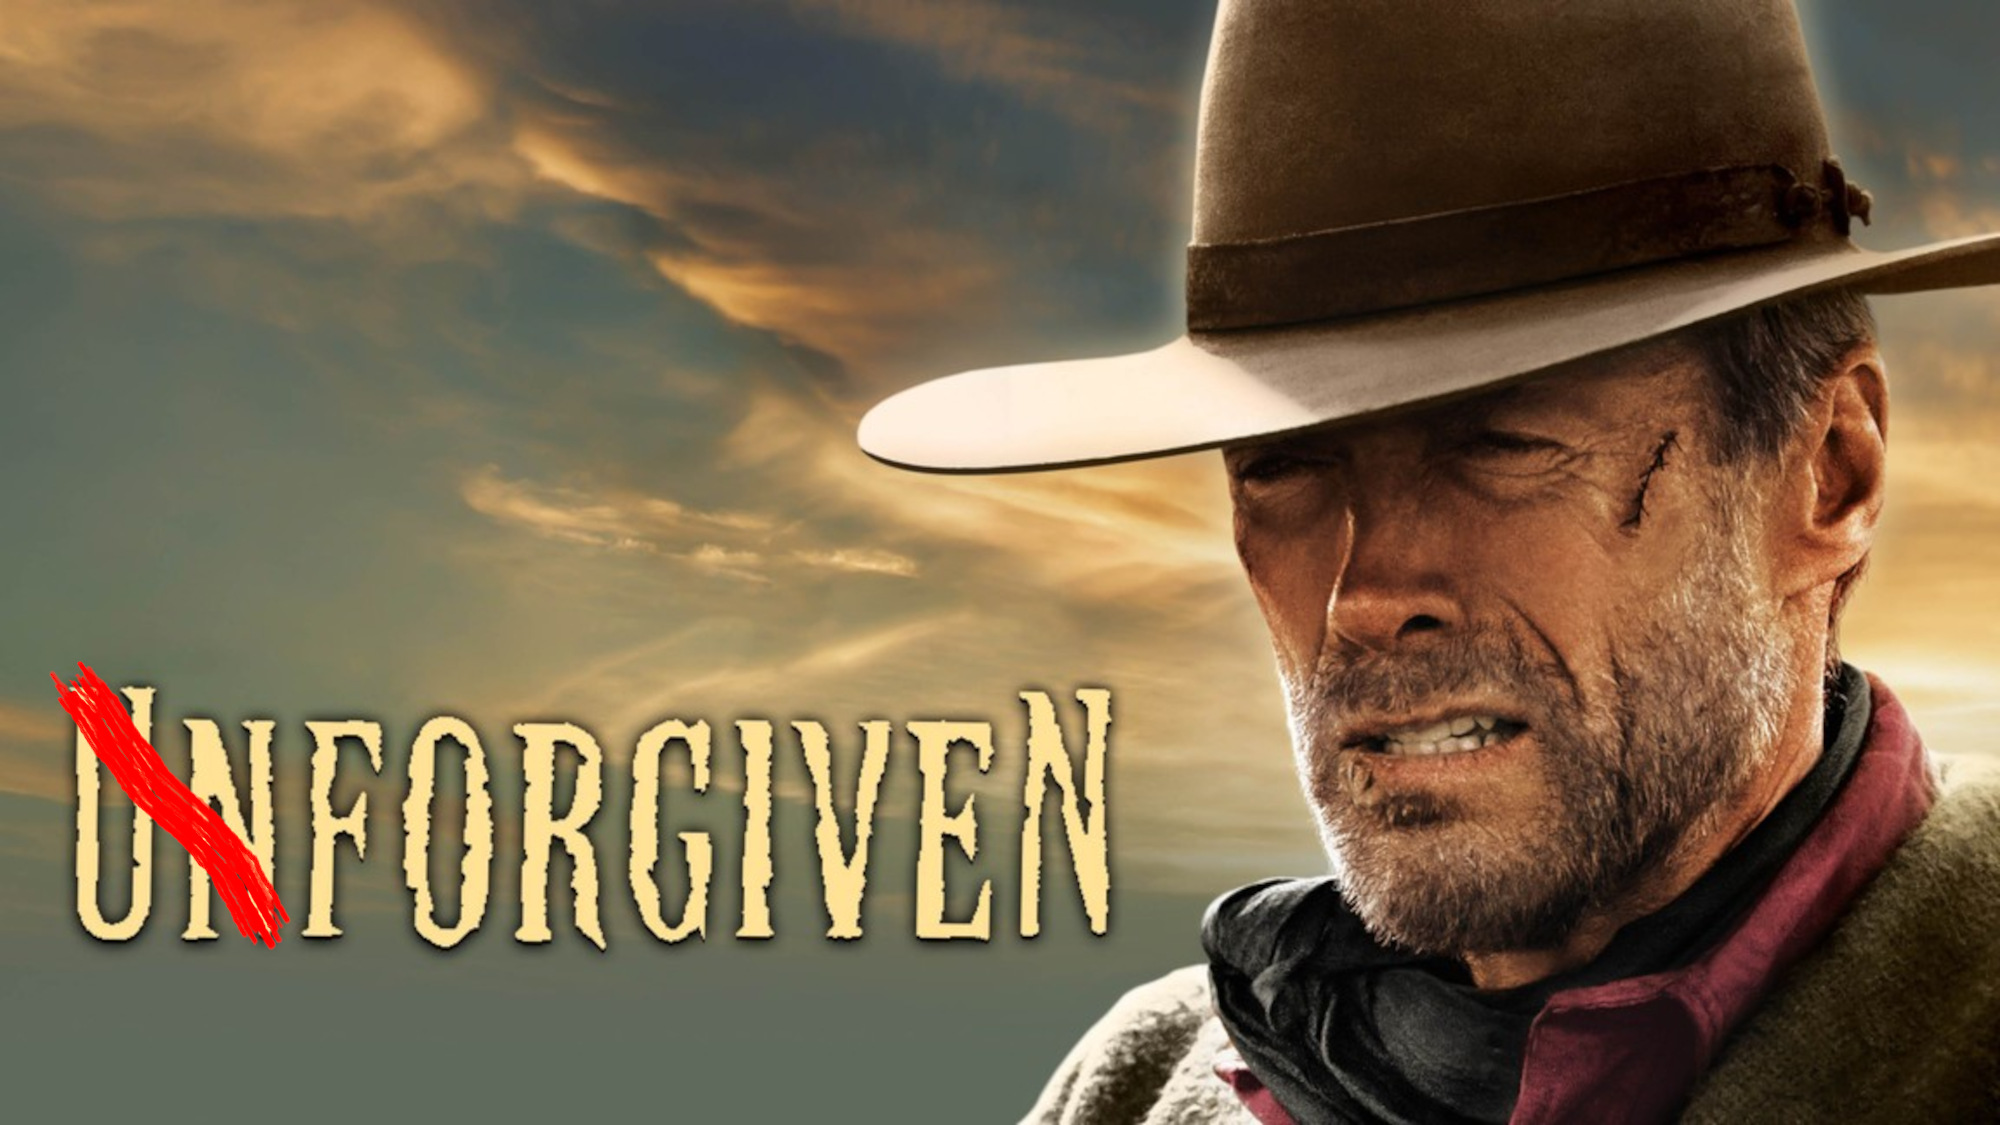 The Unforgiven movie title with "Un" crossed out